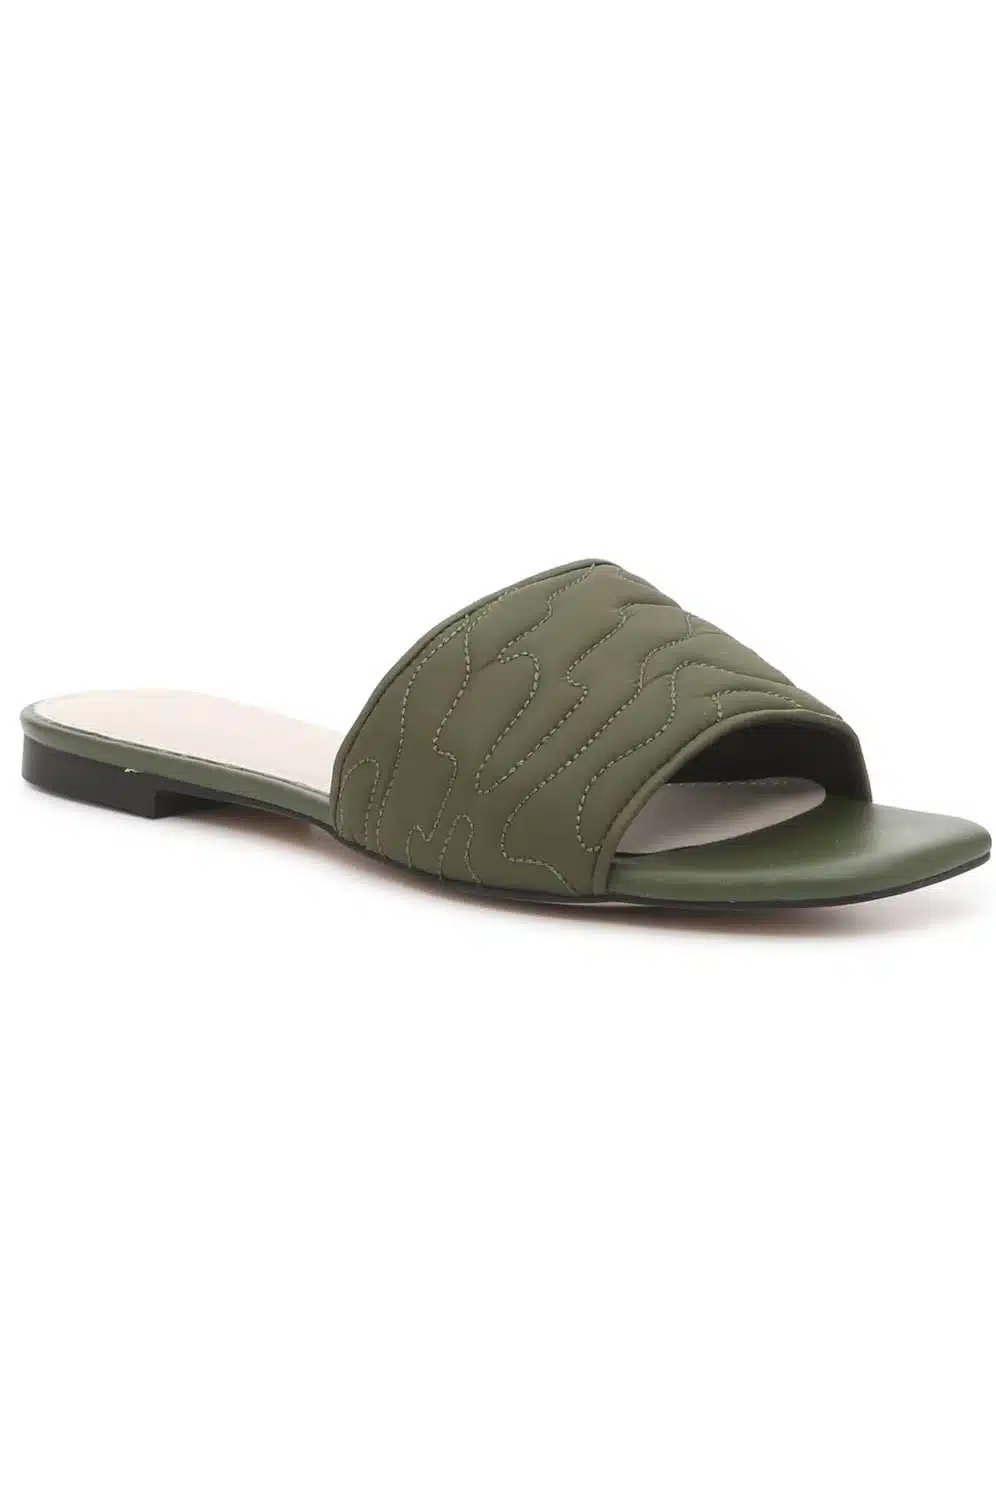 Green women's slide-style shoe as a perfect anchor to your Mother's Day outfits.